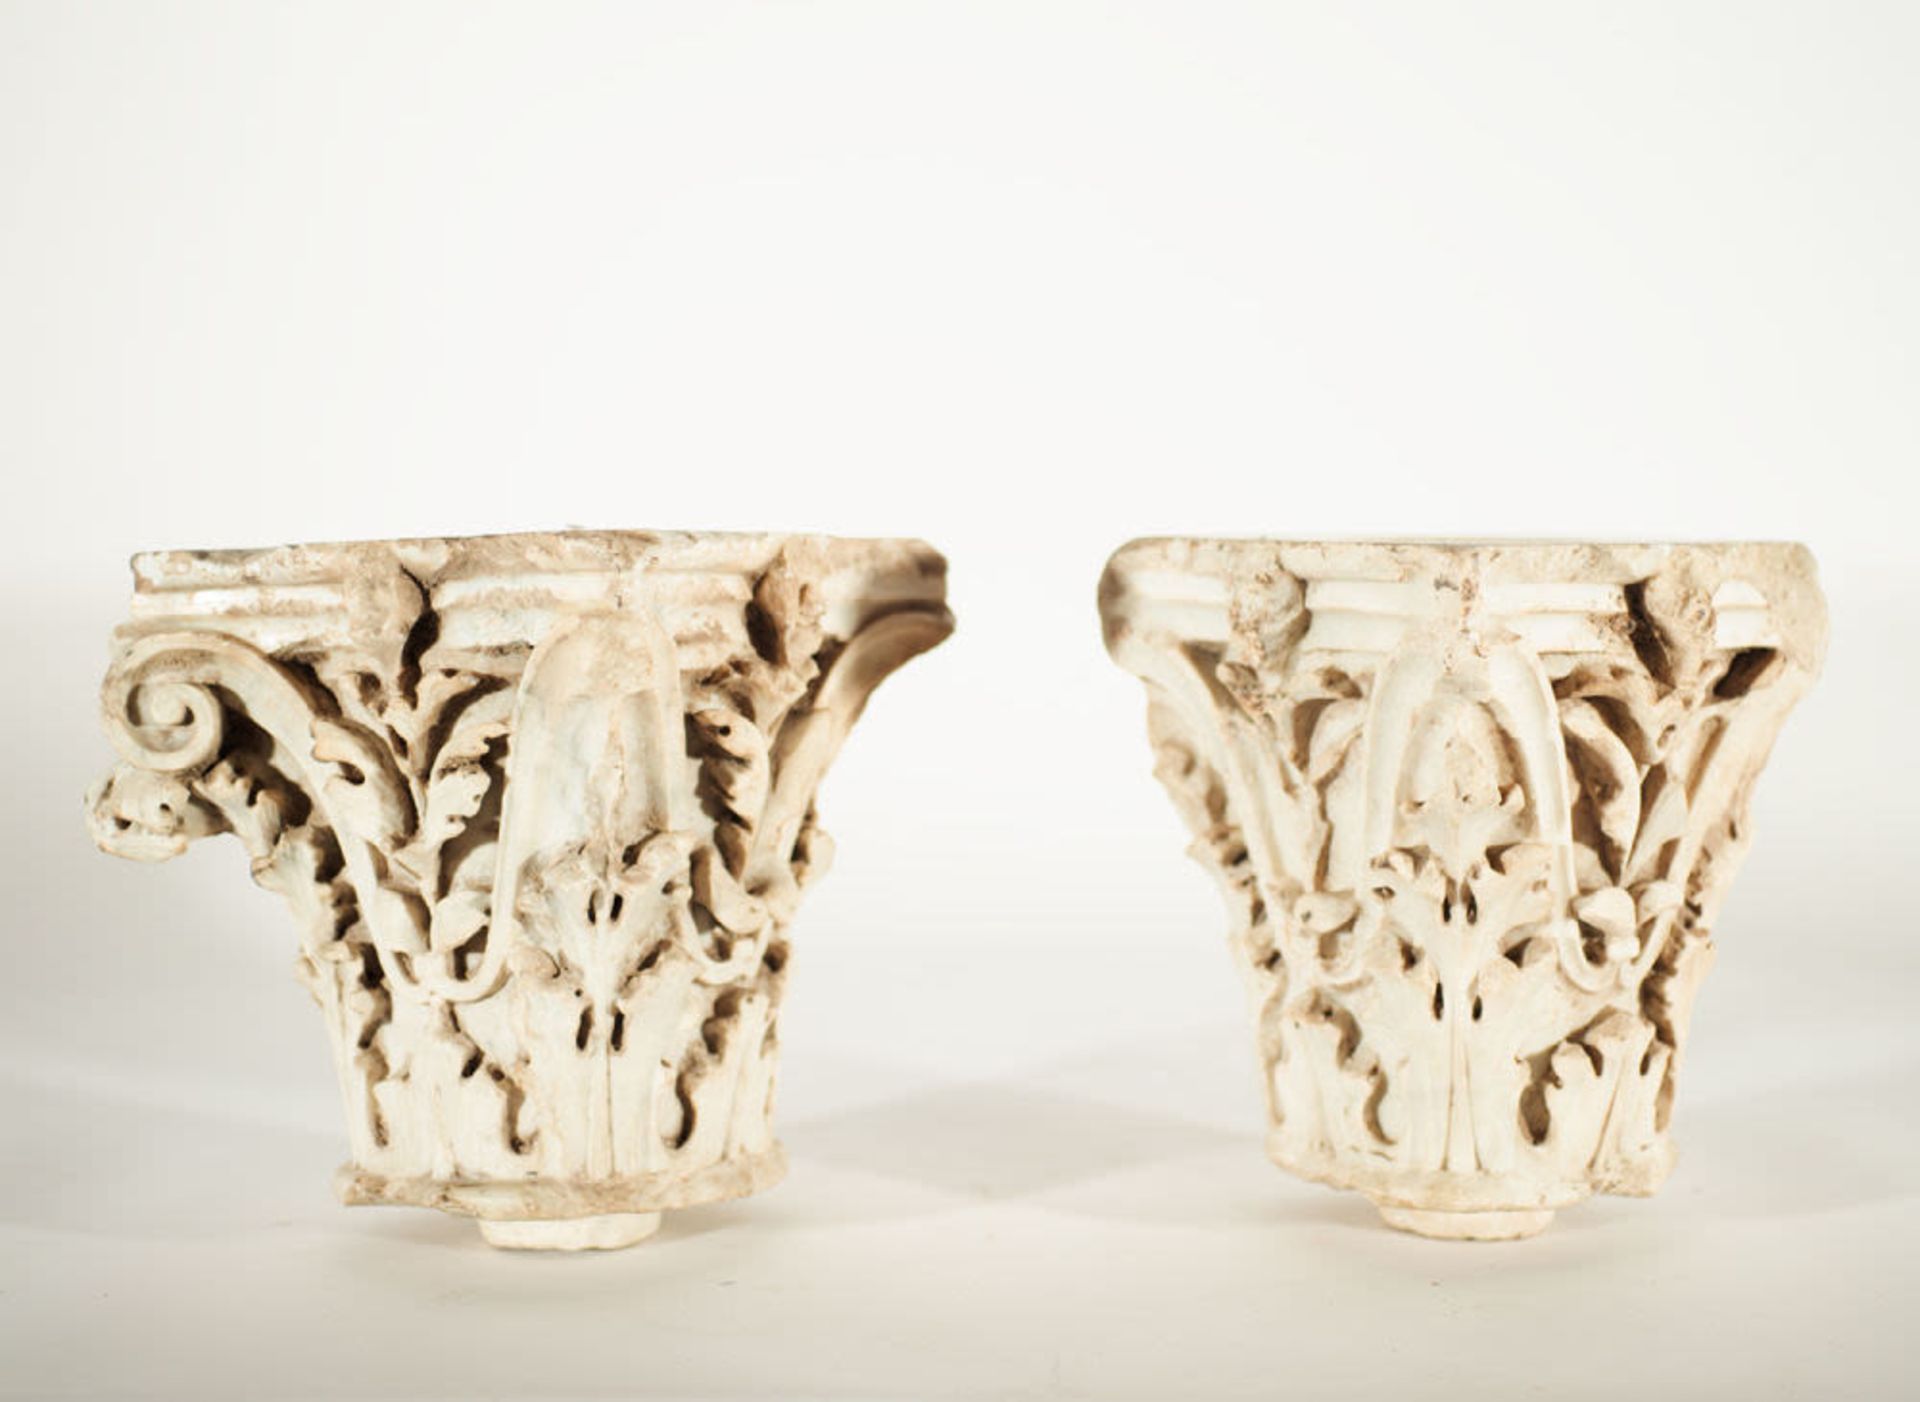 Magnificent Pair of Corinthian Capitals in white marble, possibly Italian and 14th - 15th centuries - Image 2 of 4